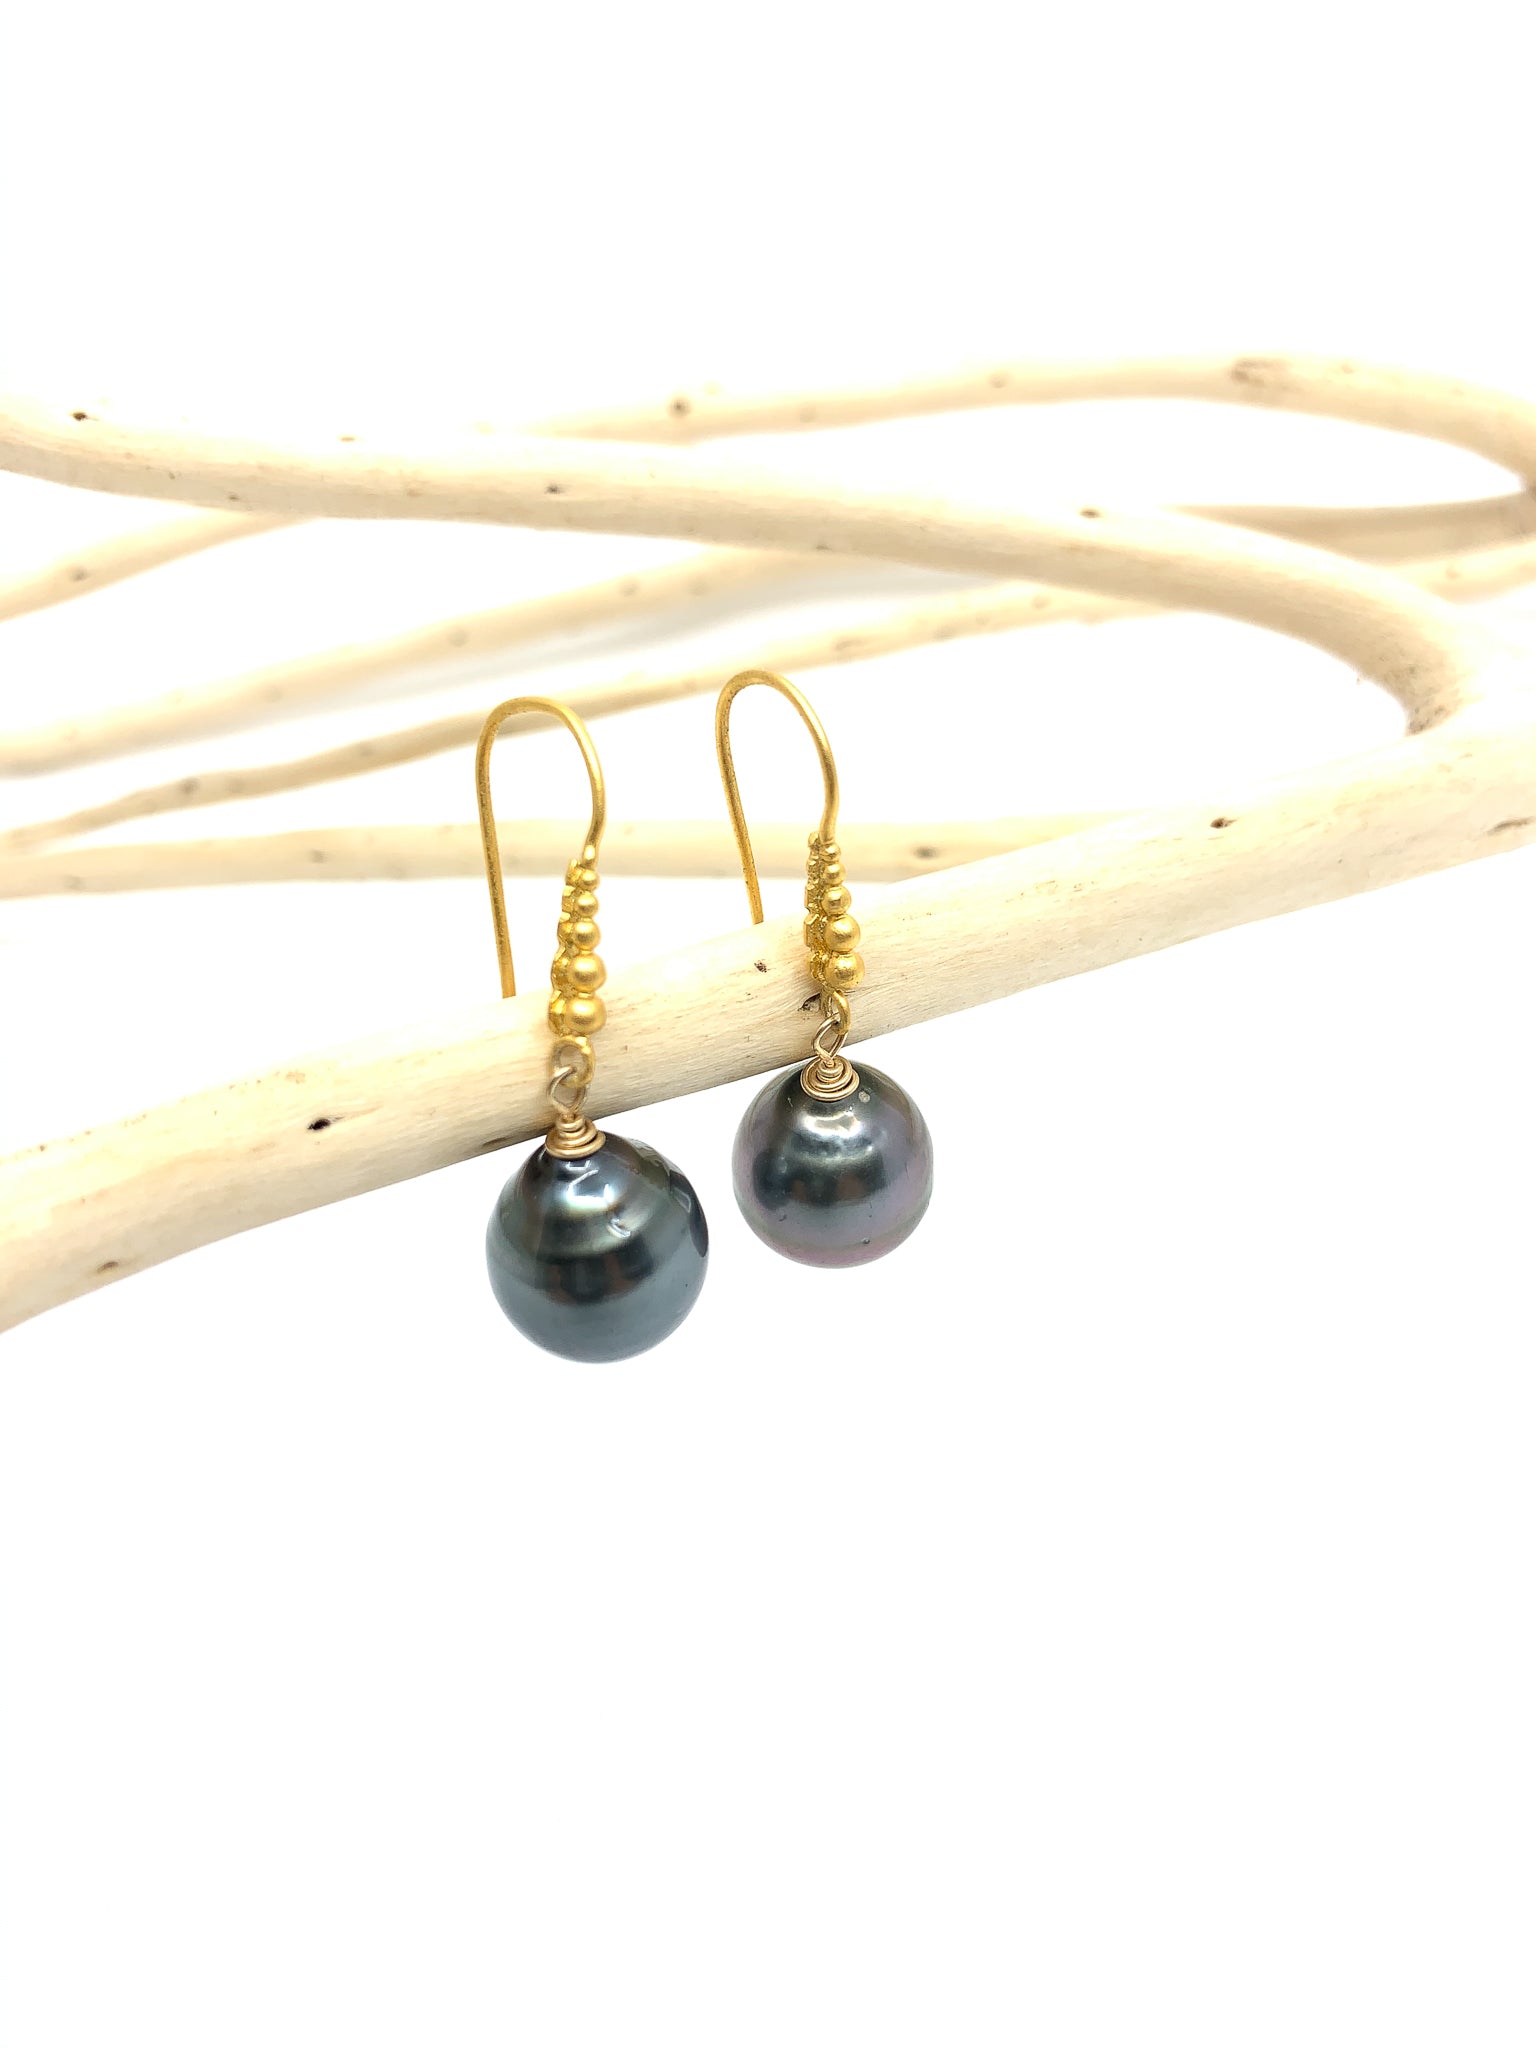 granulated Tahitian pearl gold earrings by eve black jewelry made in Hawaii